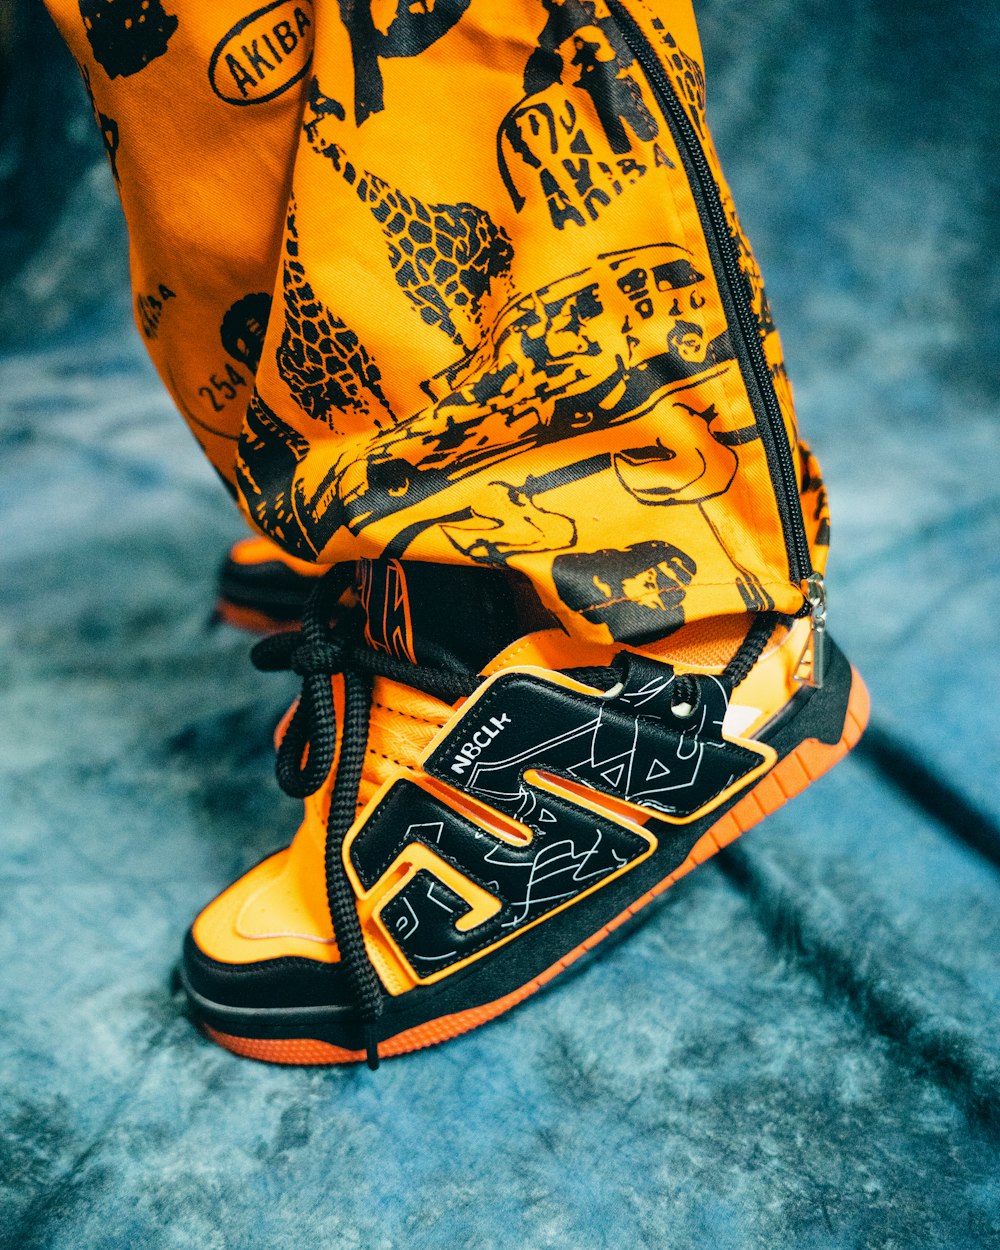 a pair of yellow and black shoes with giraffes on them